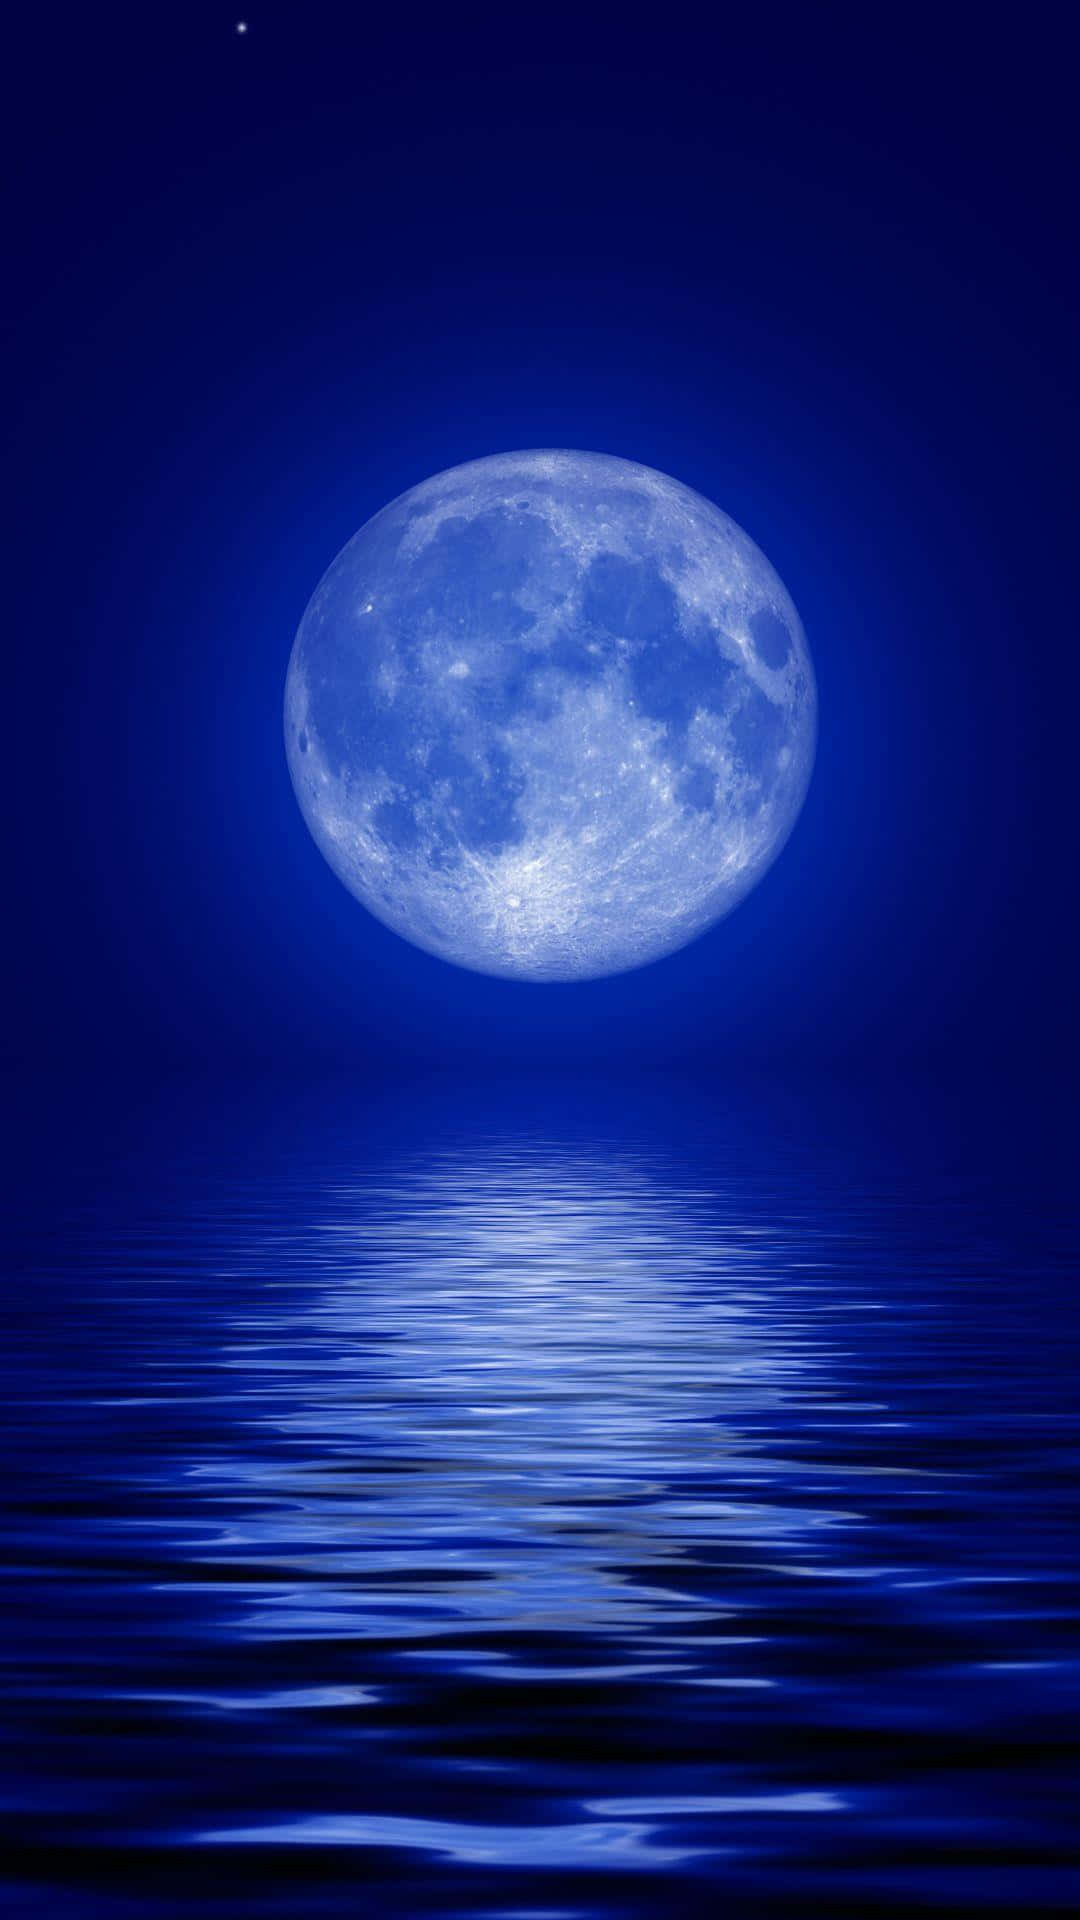 The Blue Moon Iphone Wallpaper